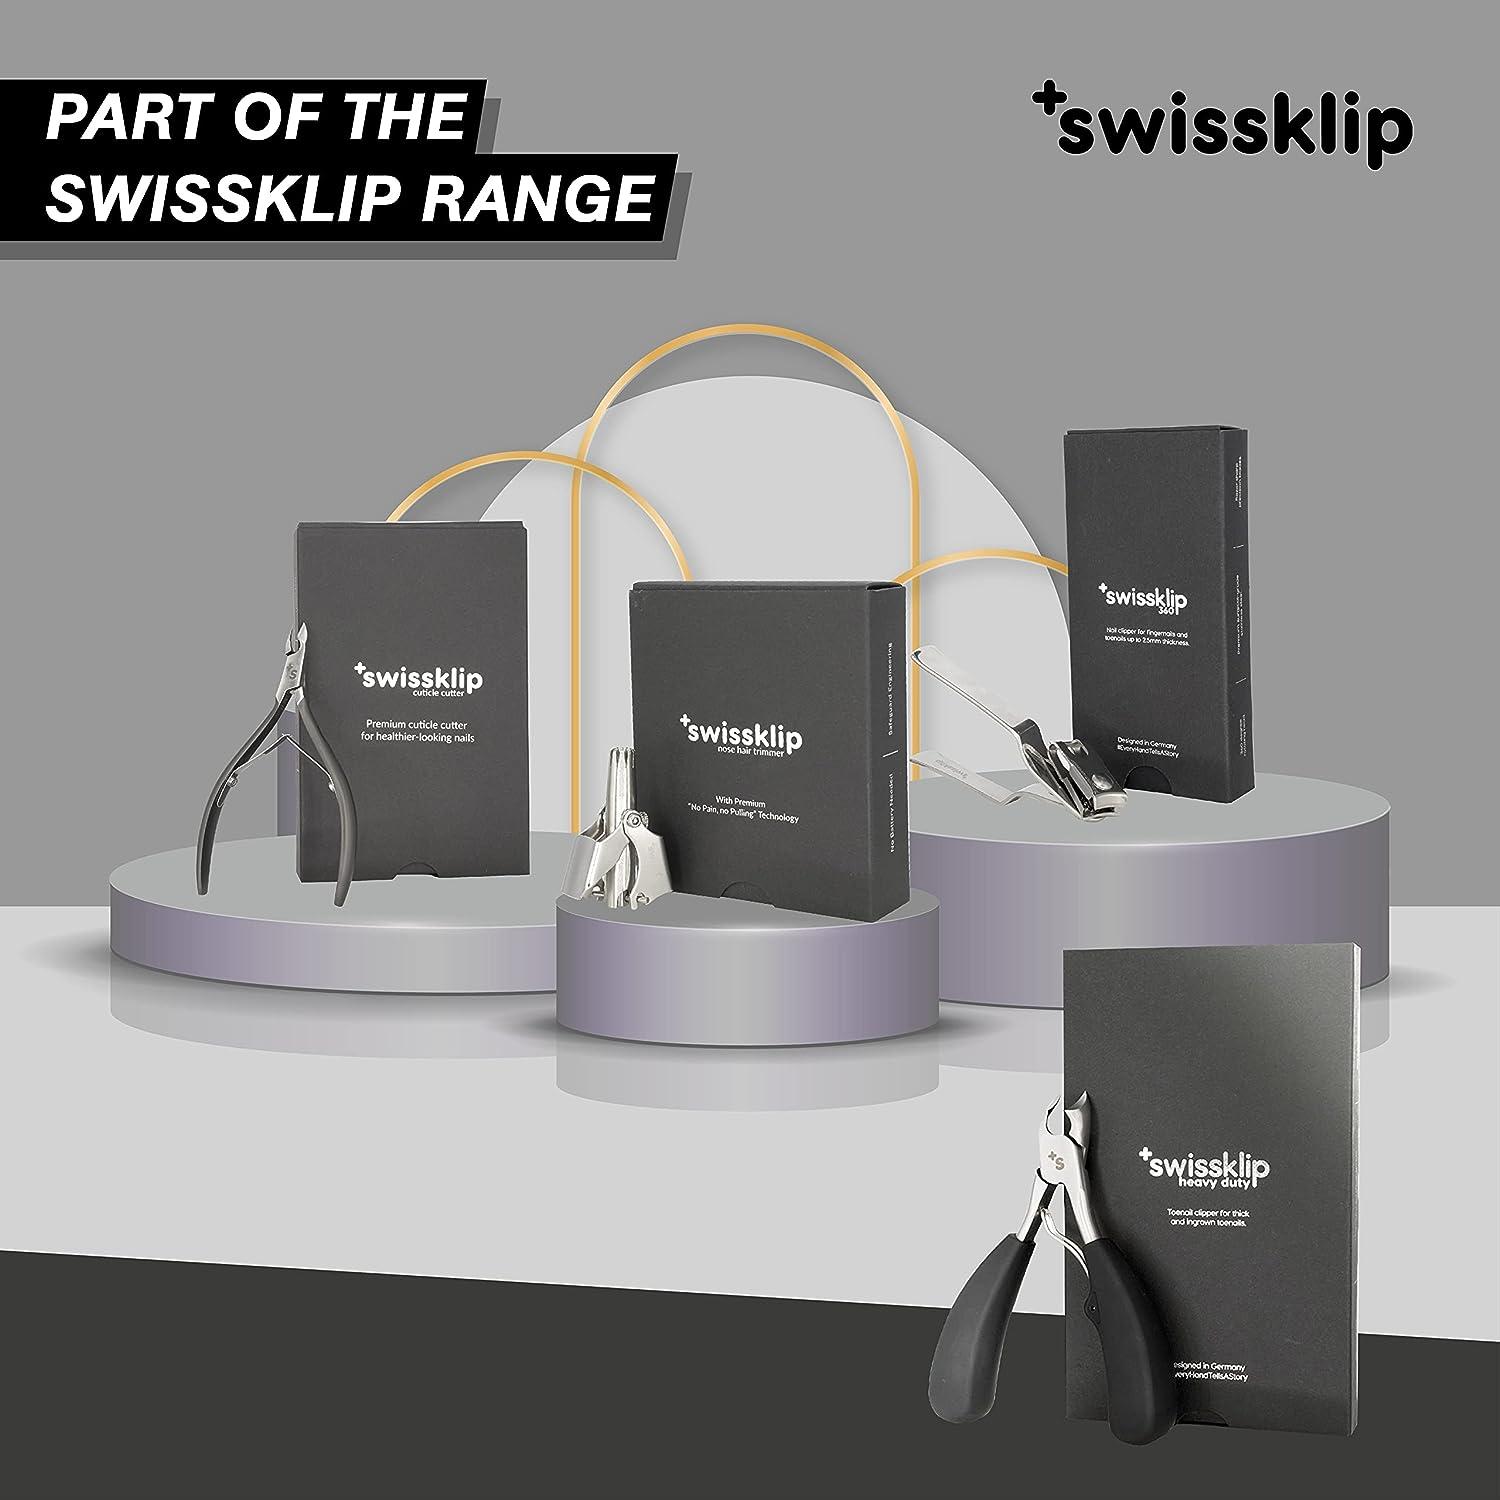 Swissklip Review: Is This the Best Heavy Duty Nail Clipper of 2022